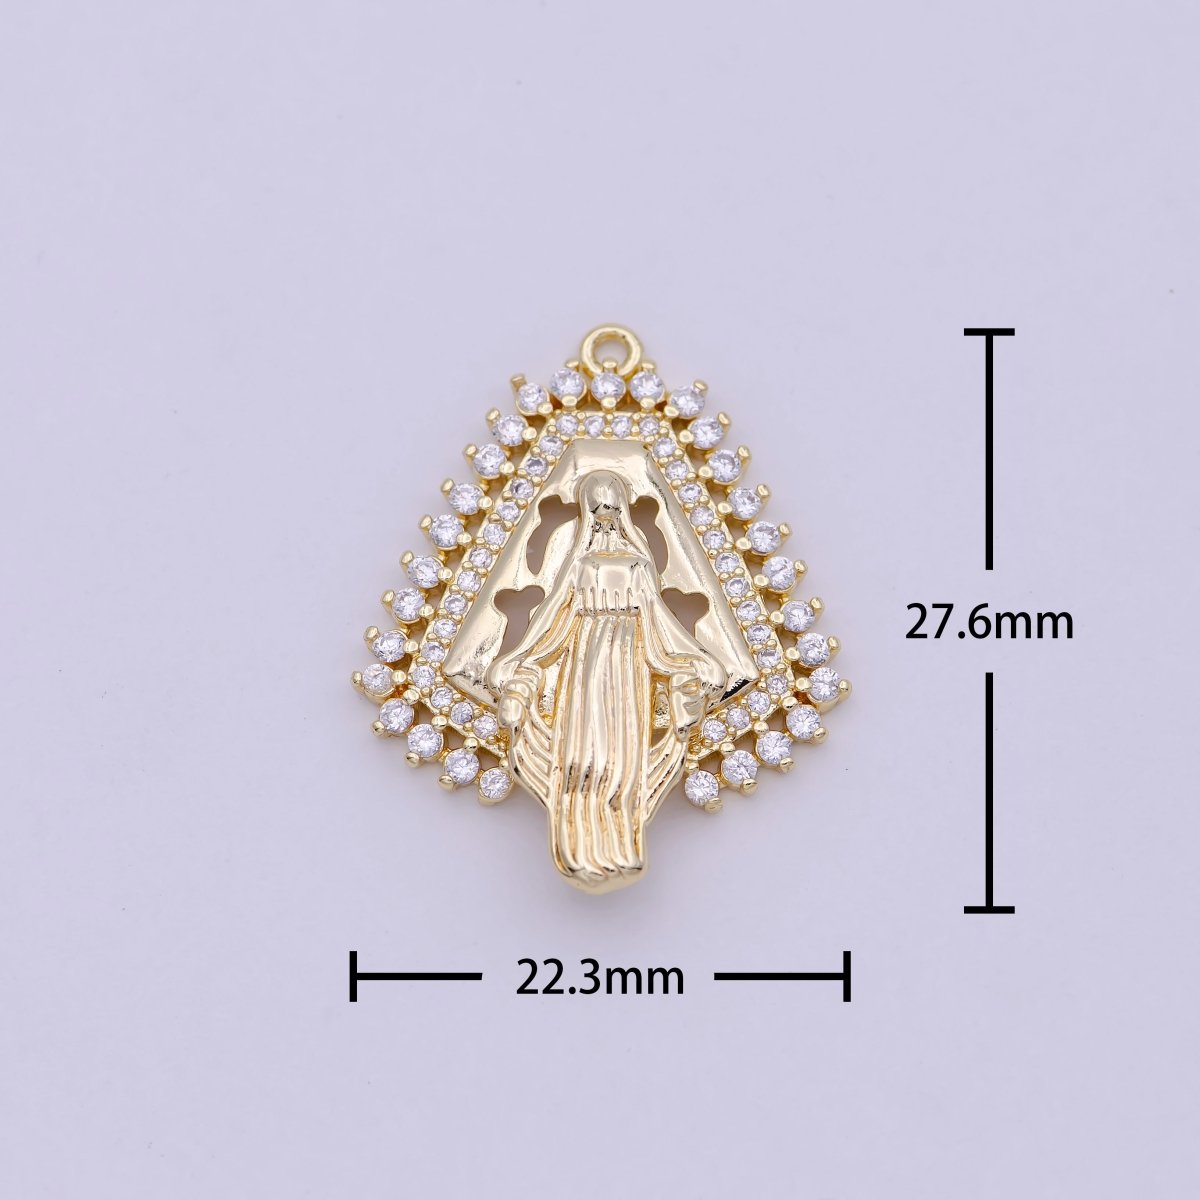 Dainty 14K Gold Filled Miraculous Lady Virgin Mary Charm Delicate Micro Pave Religious Charm N-458 - DLUXCA